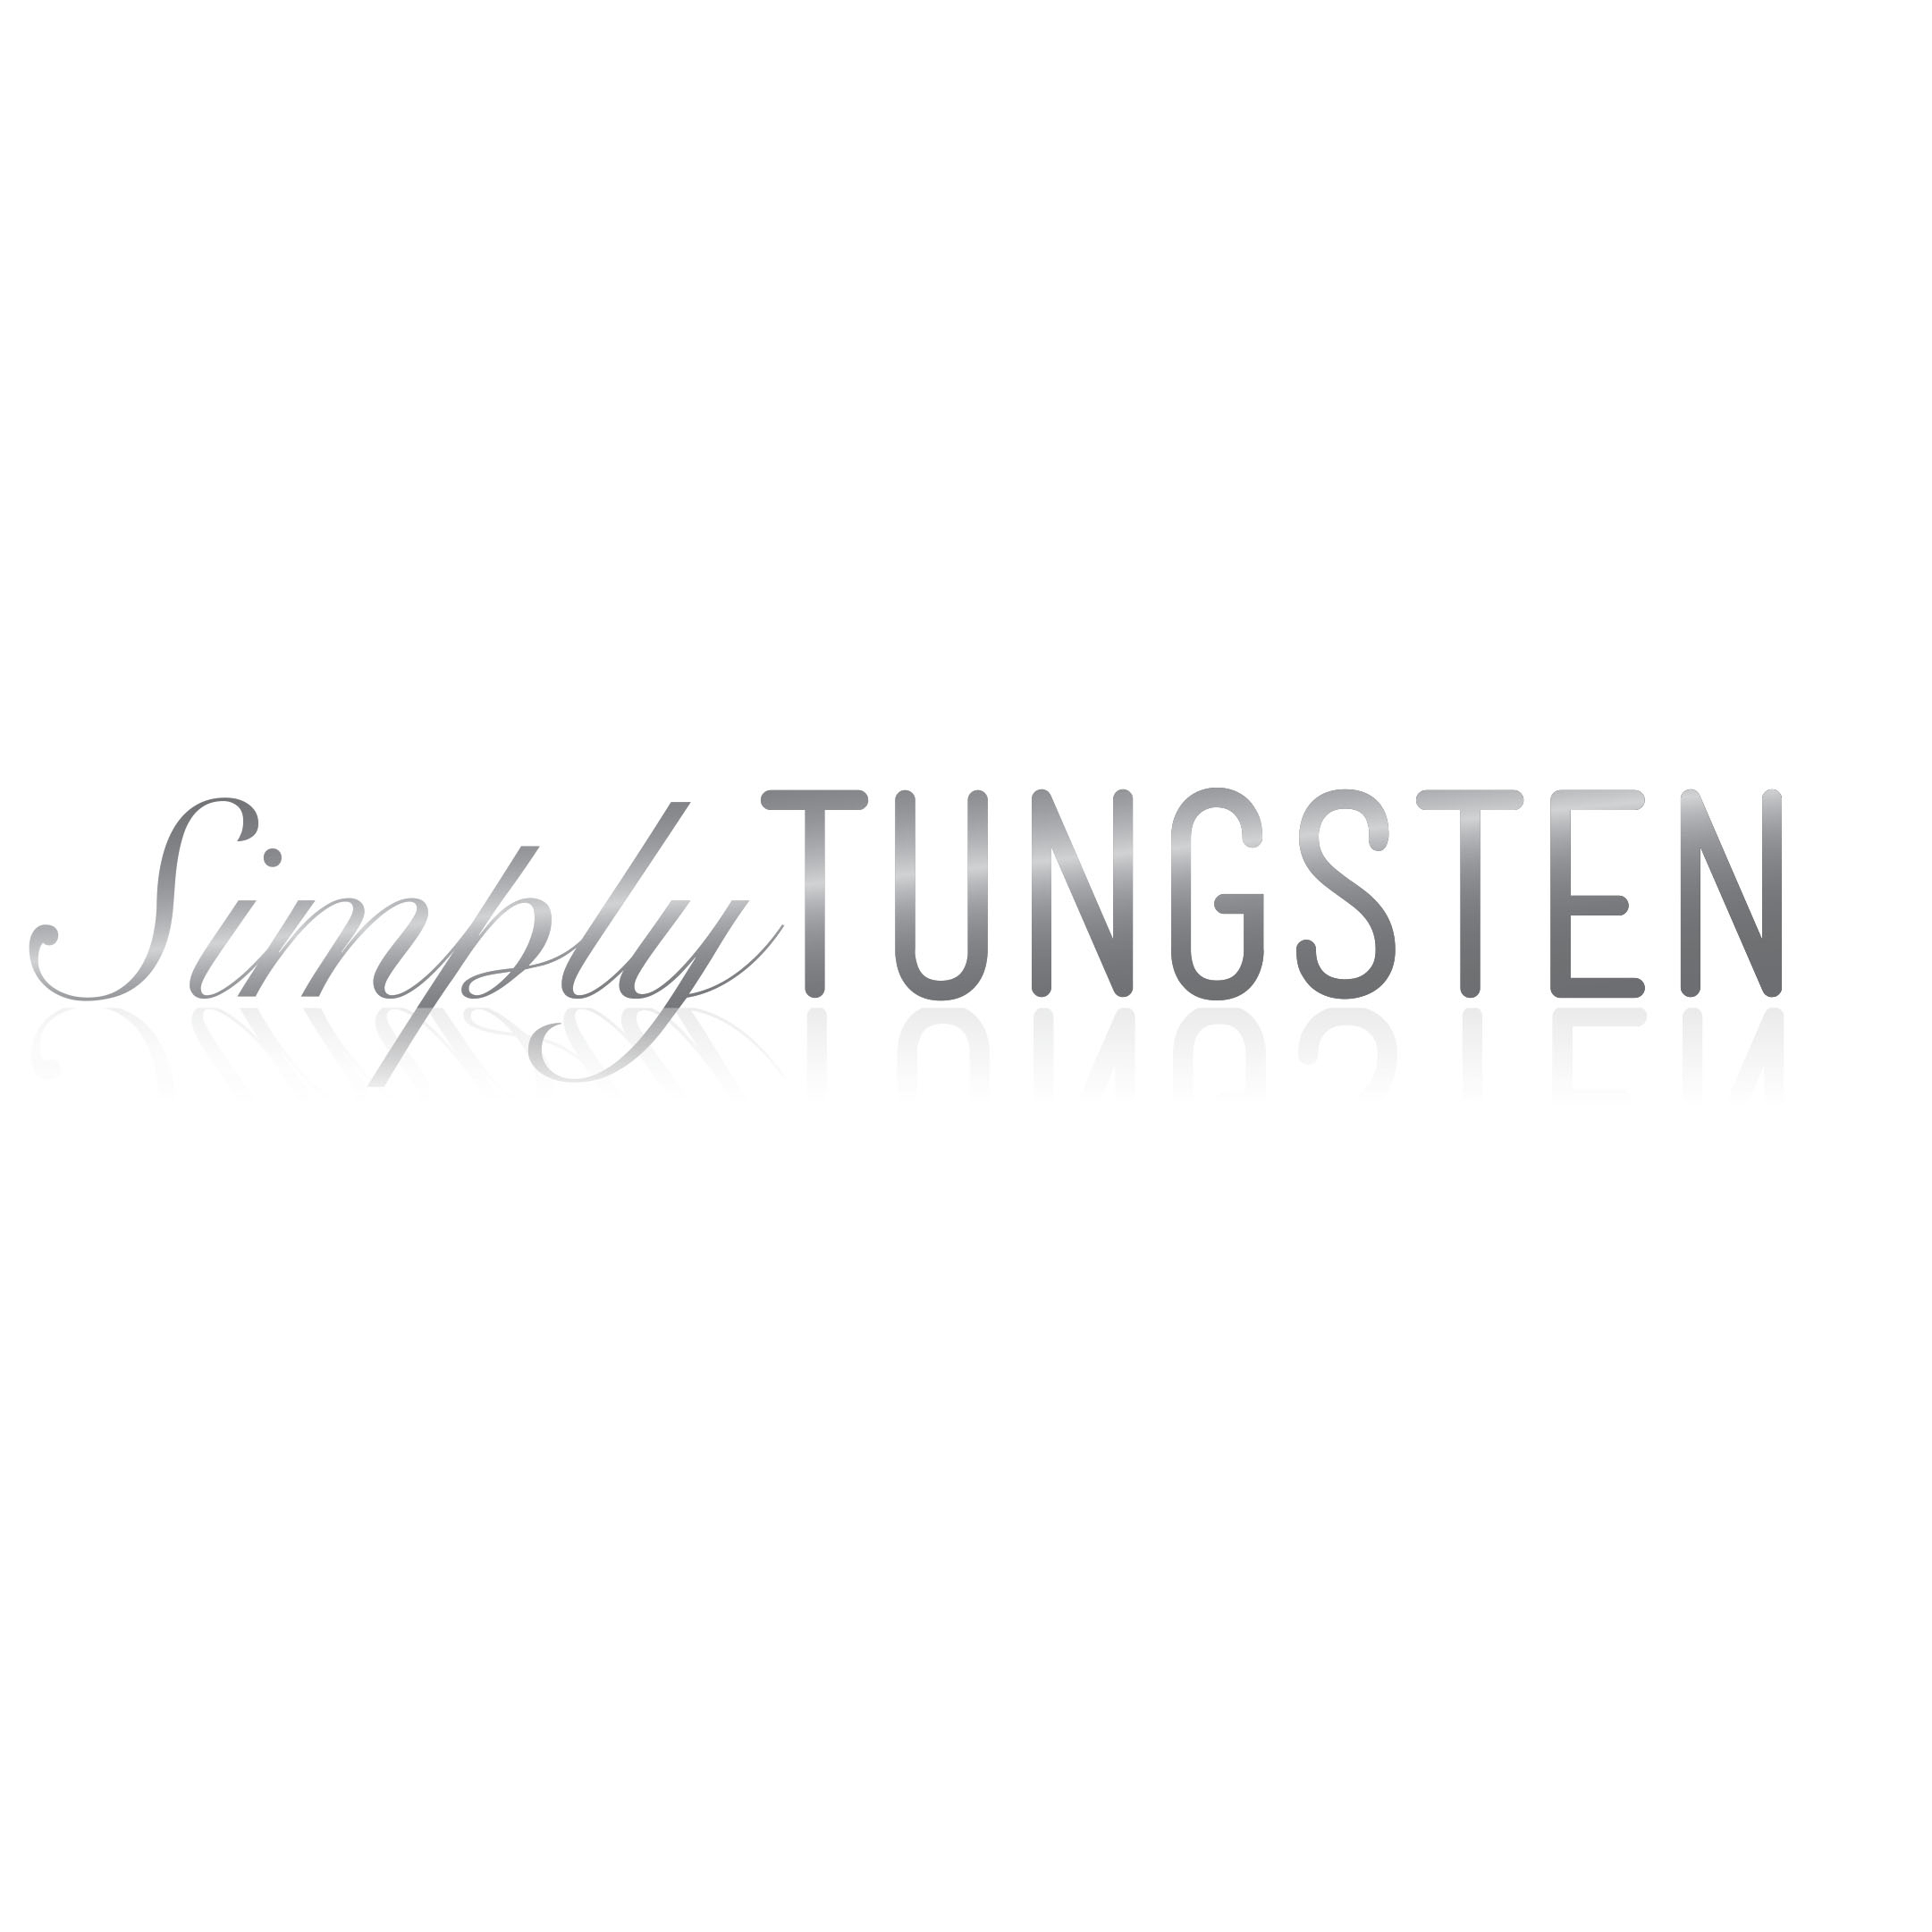 Simply Tungsten